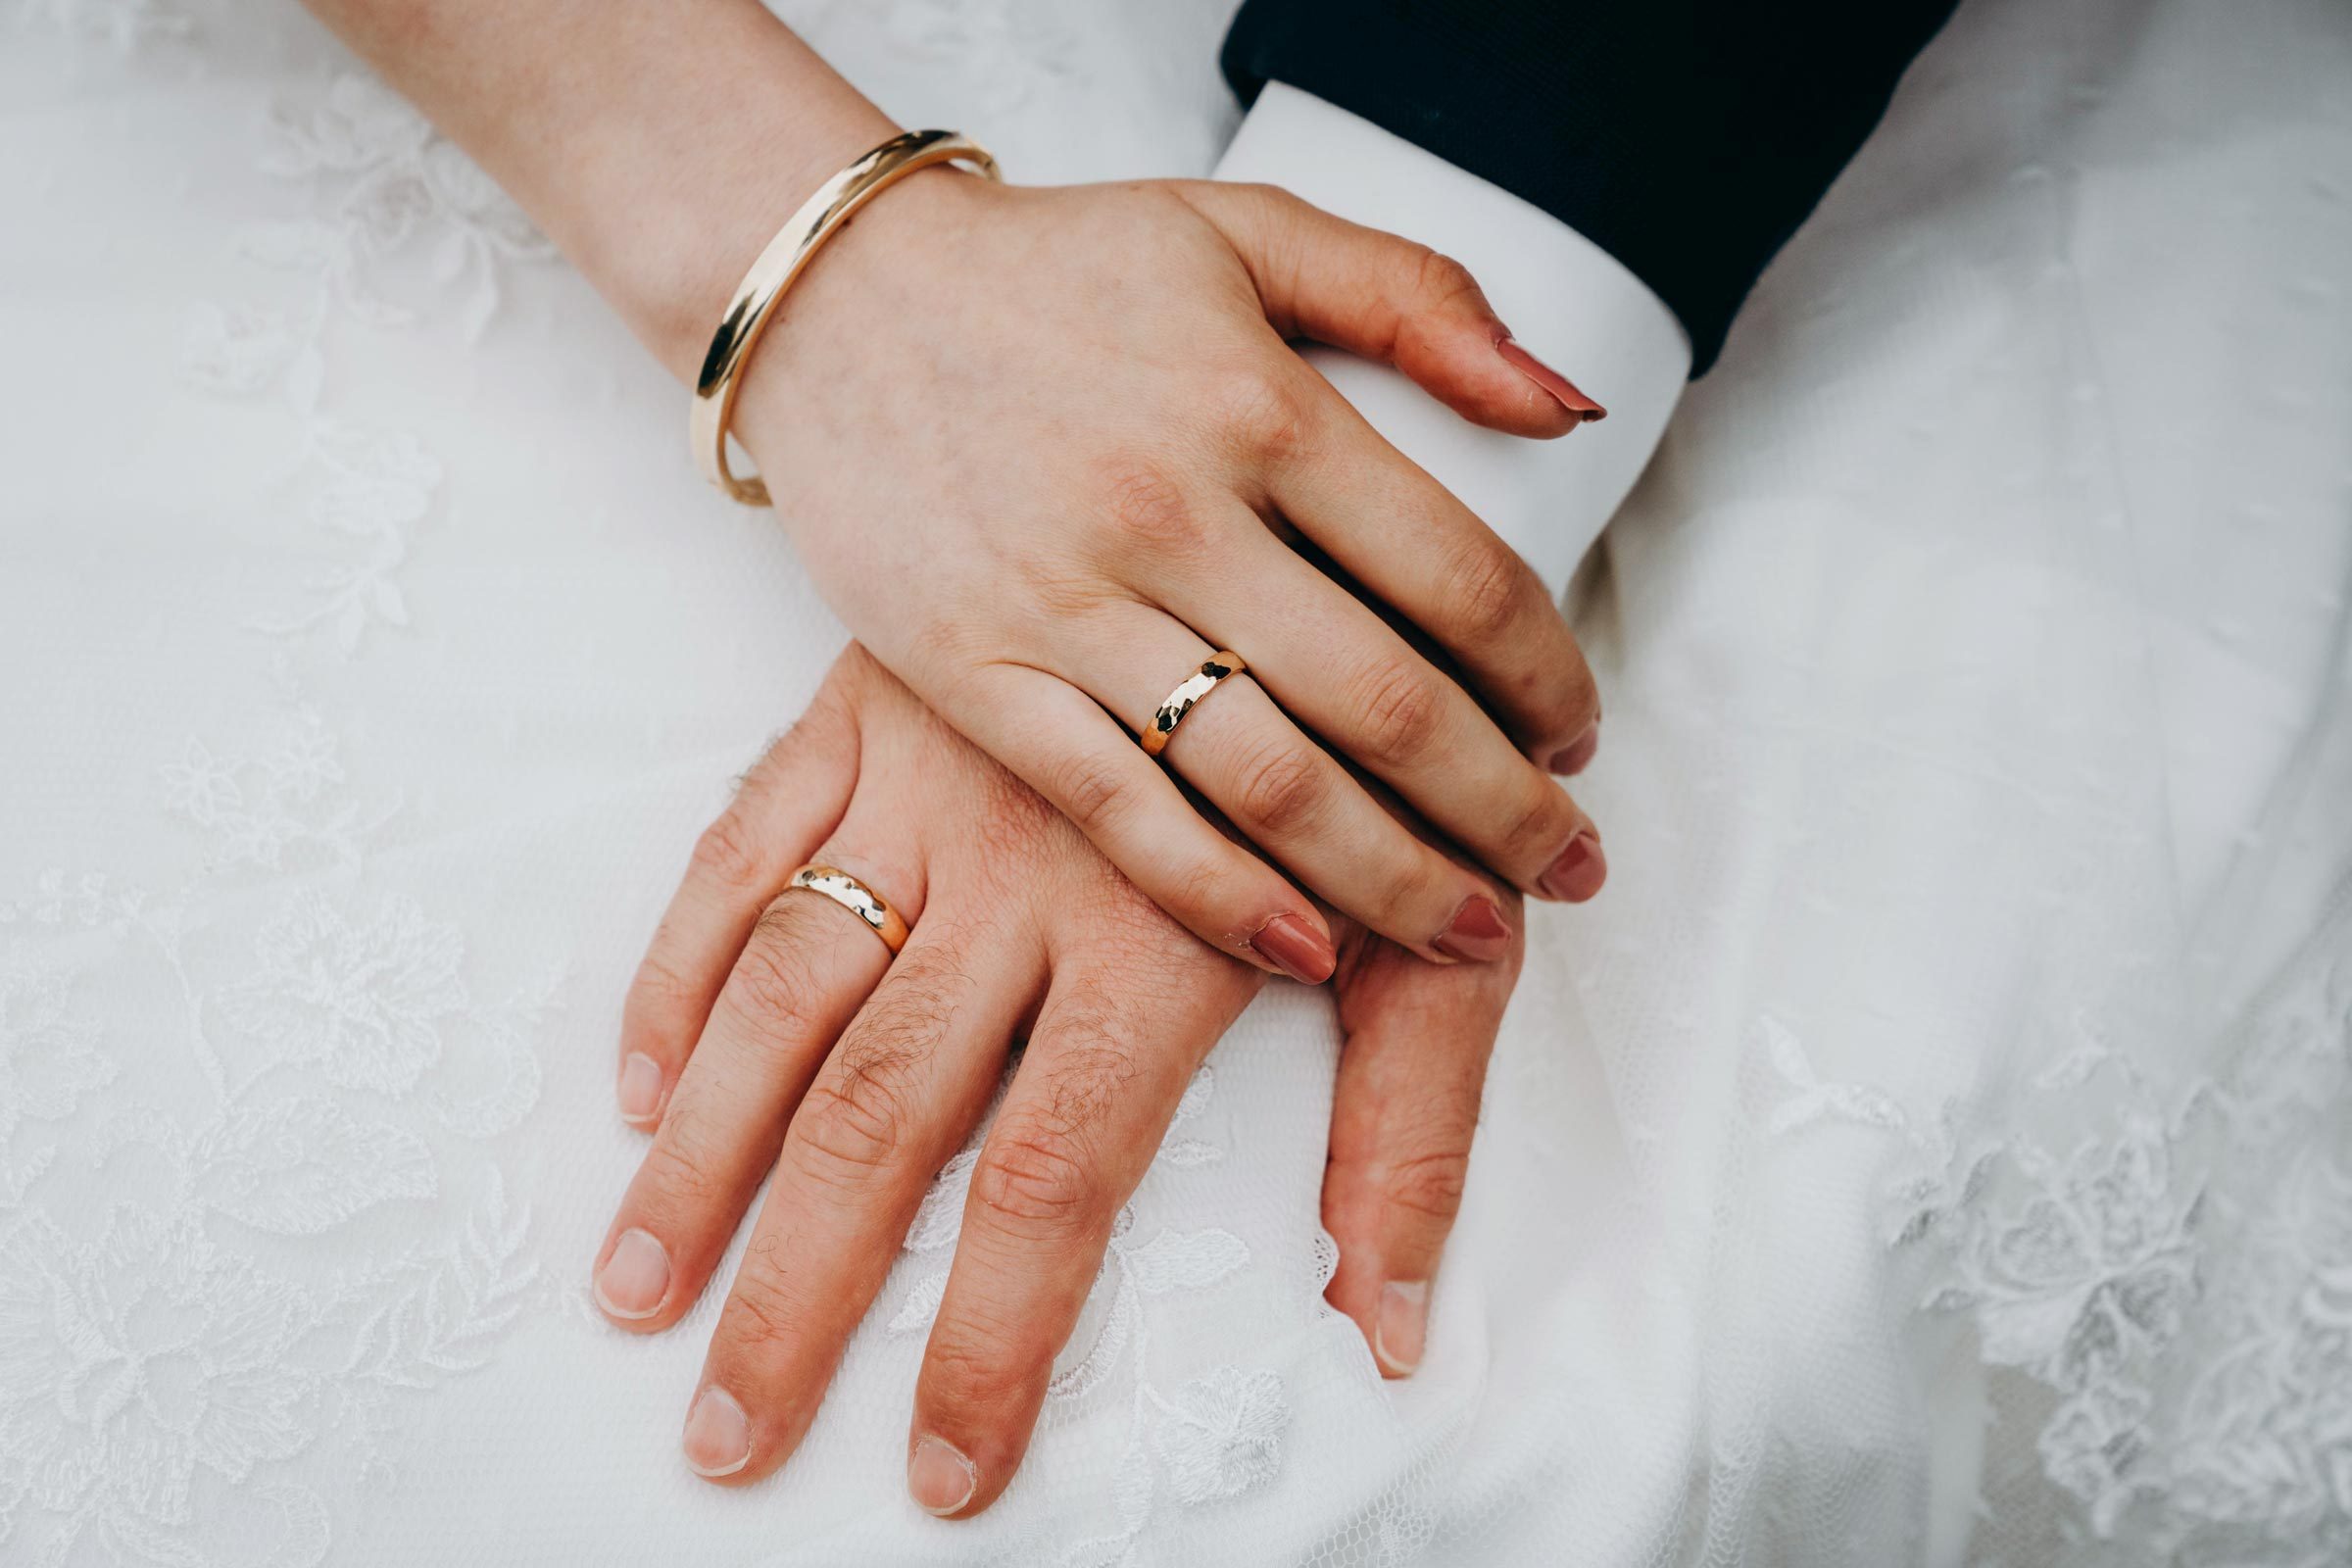 The Ring Finger: History of Wearing Wedding Rings on the Fourth